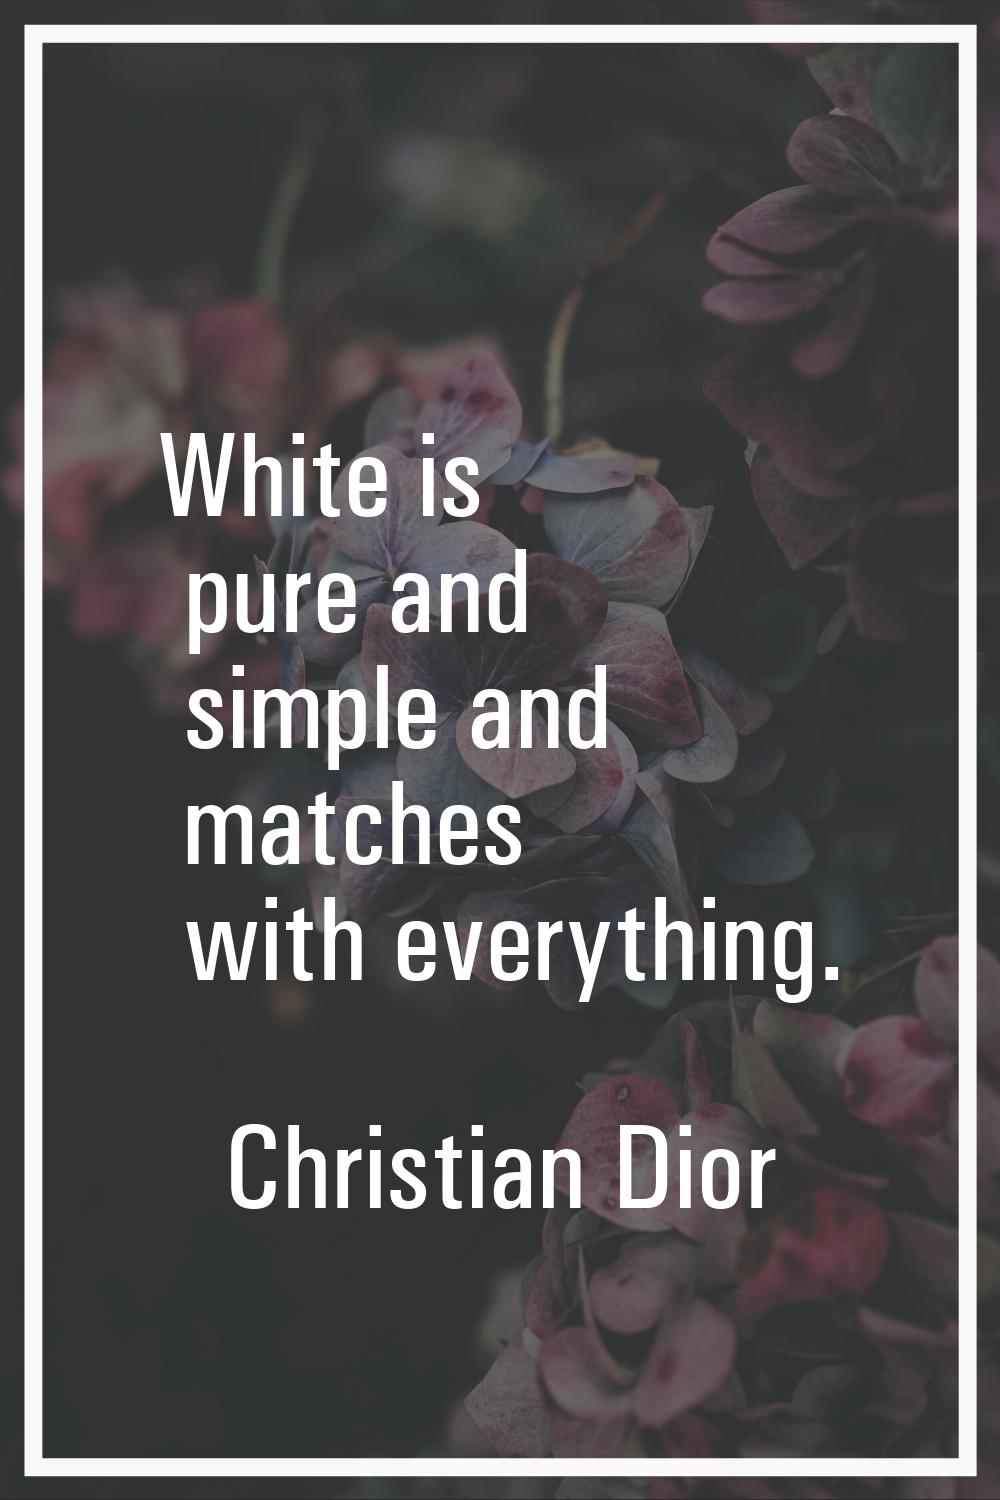 White is pure and simple and matches with everything.